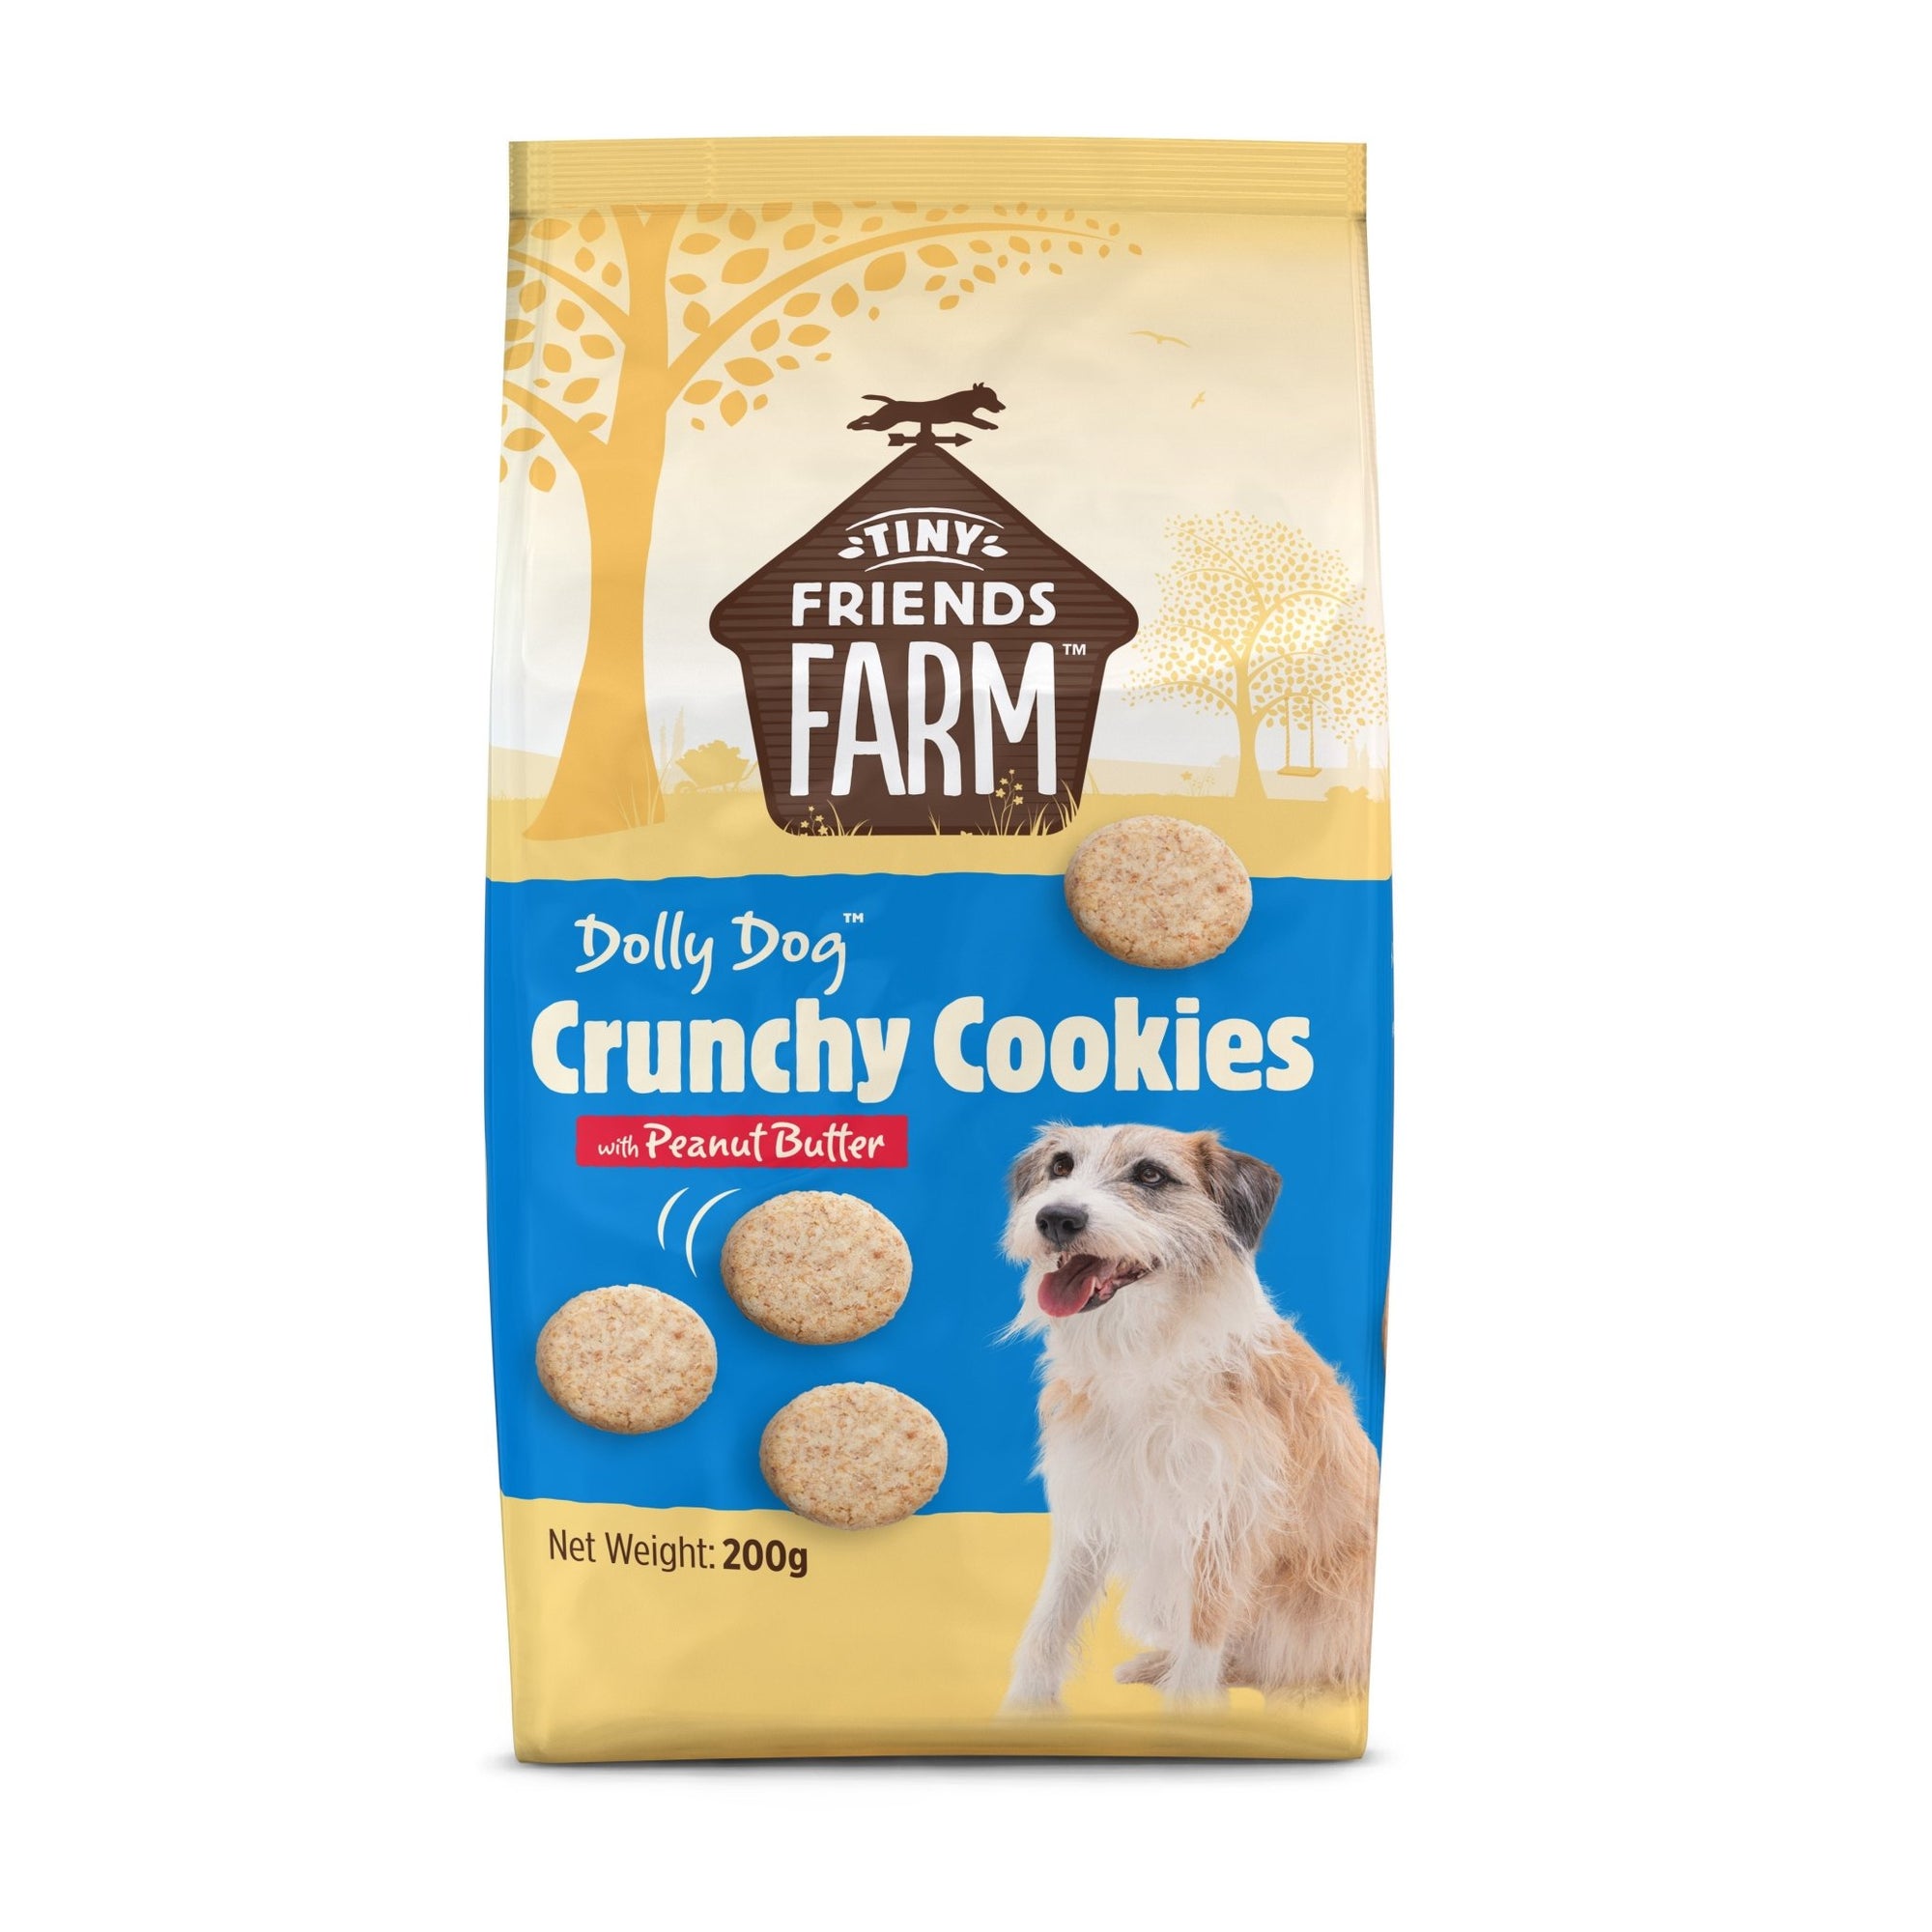 Tiny Friends Farm Dolly Dog Crunchy Cookies with Peanut Butter Dog Treats 6x200g, Supreme Pet Foods,